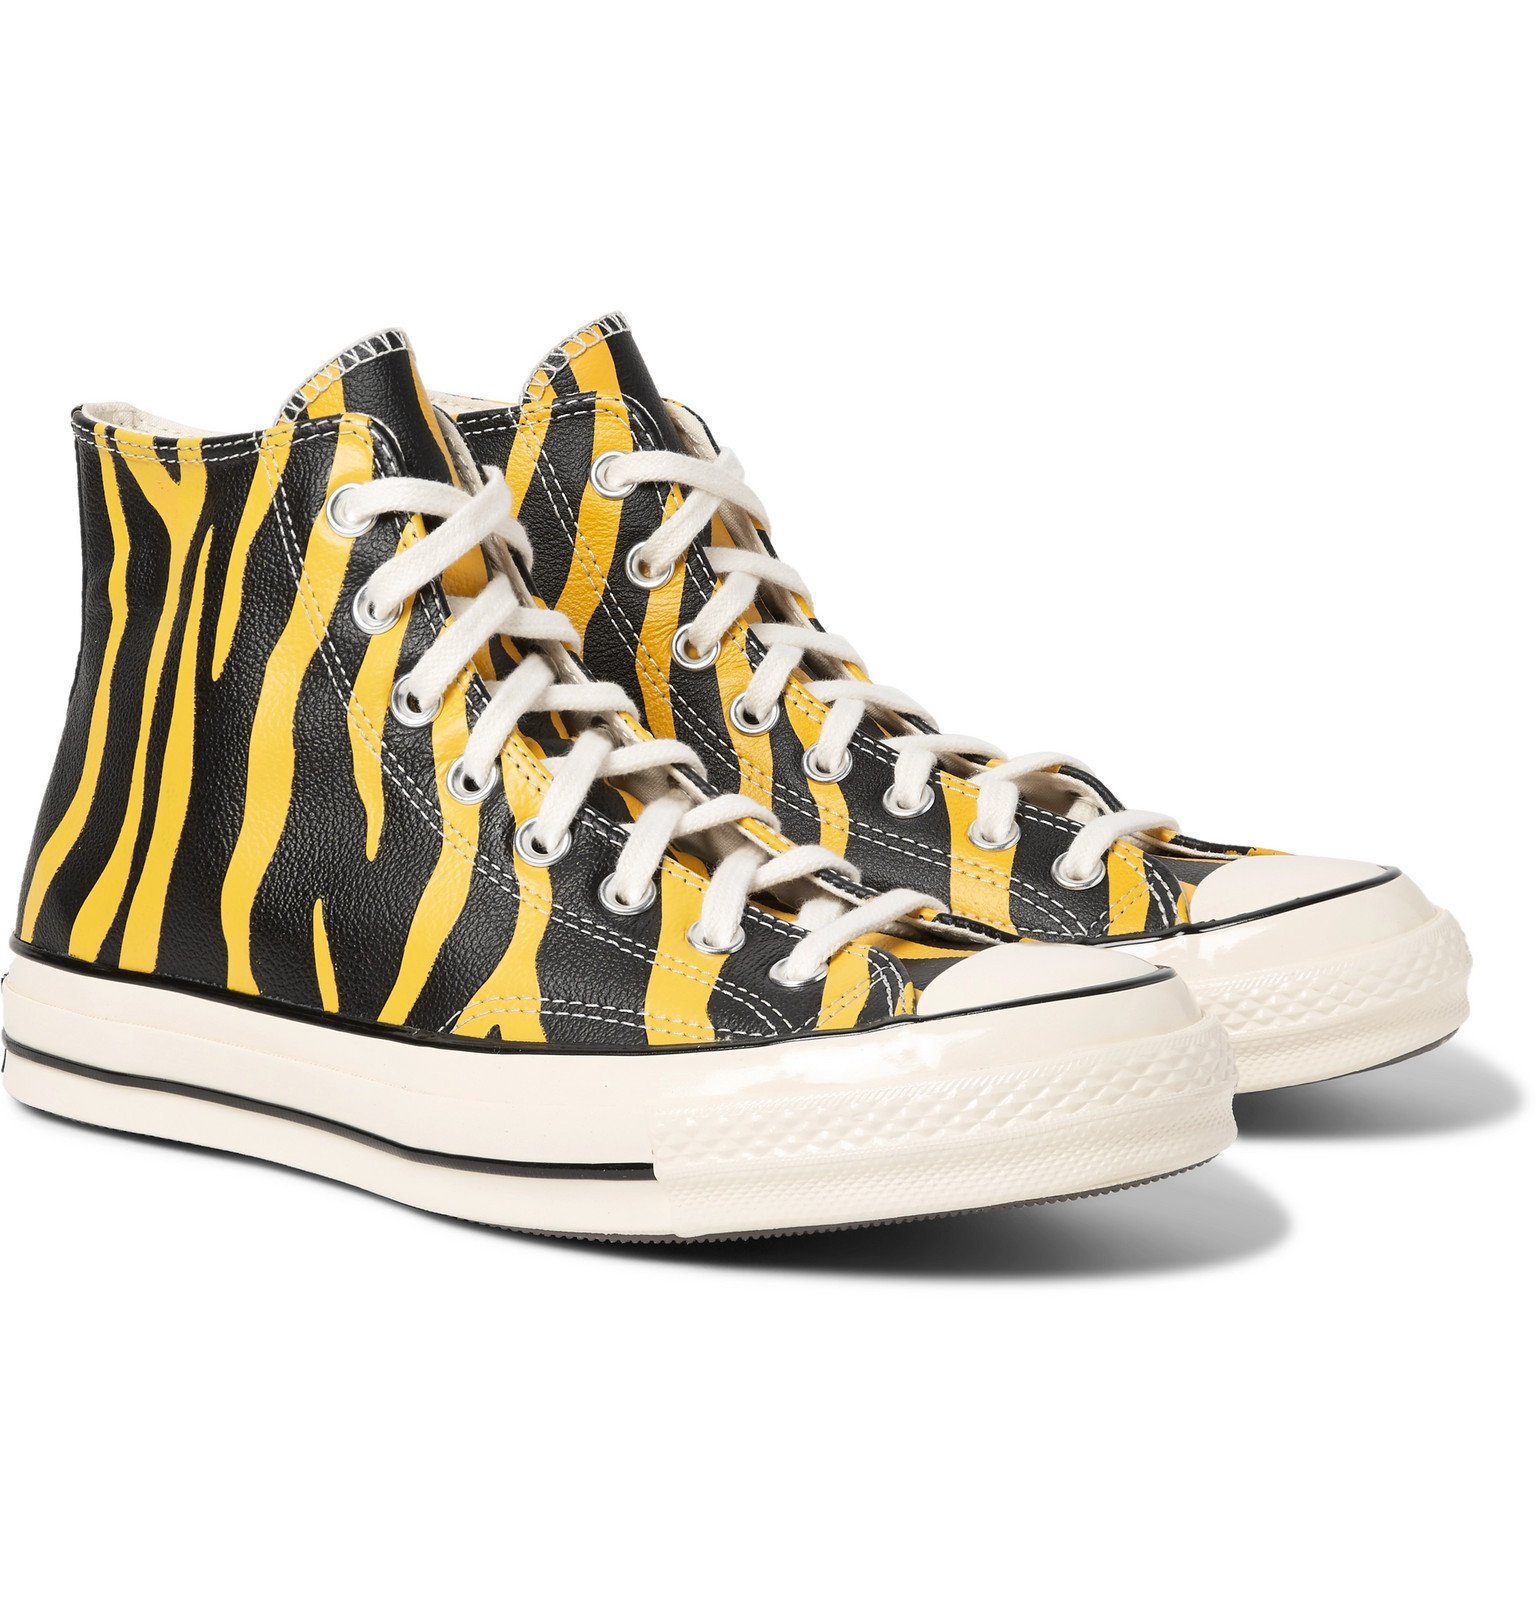 yellow converse leather